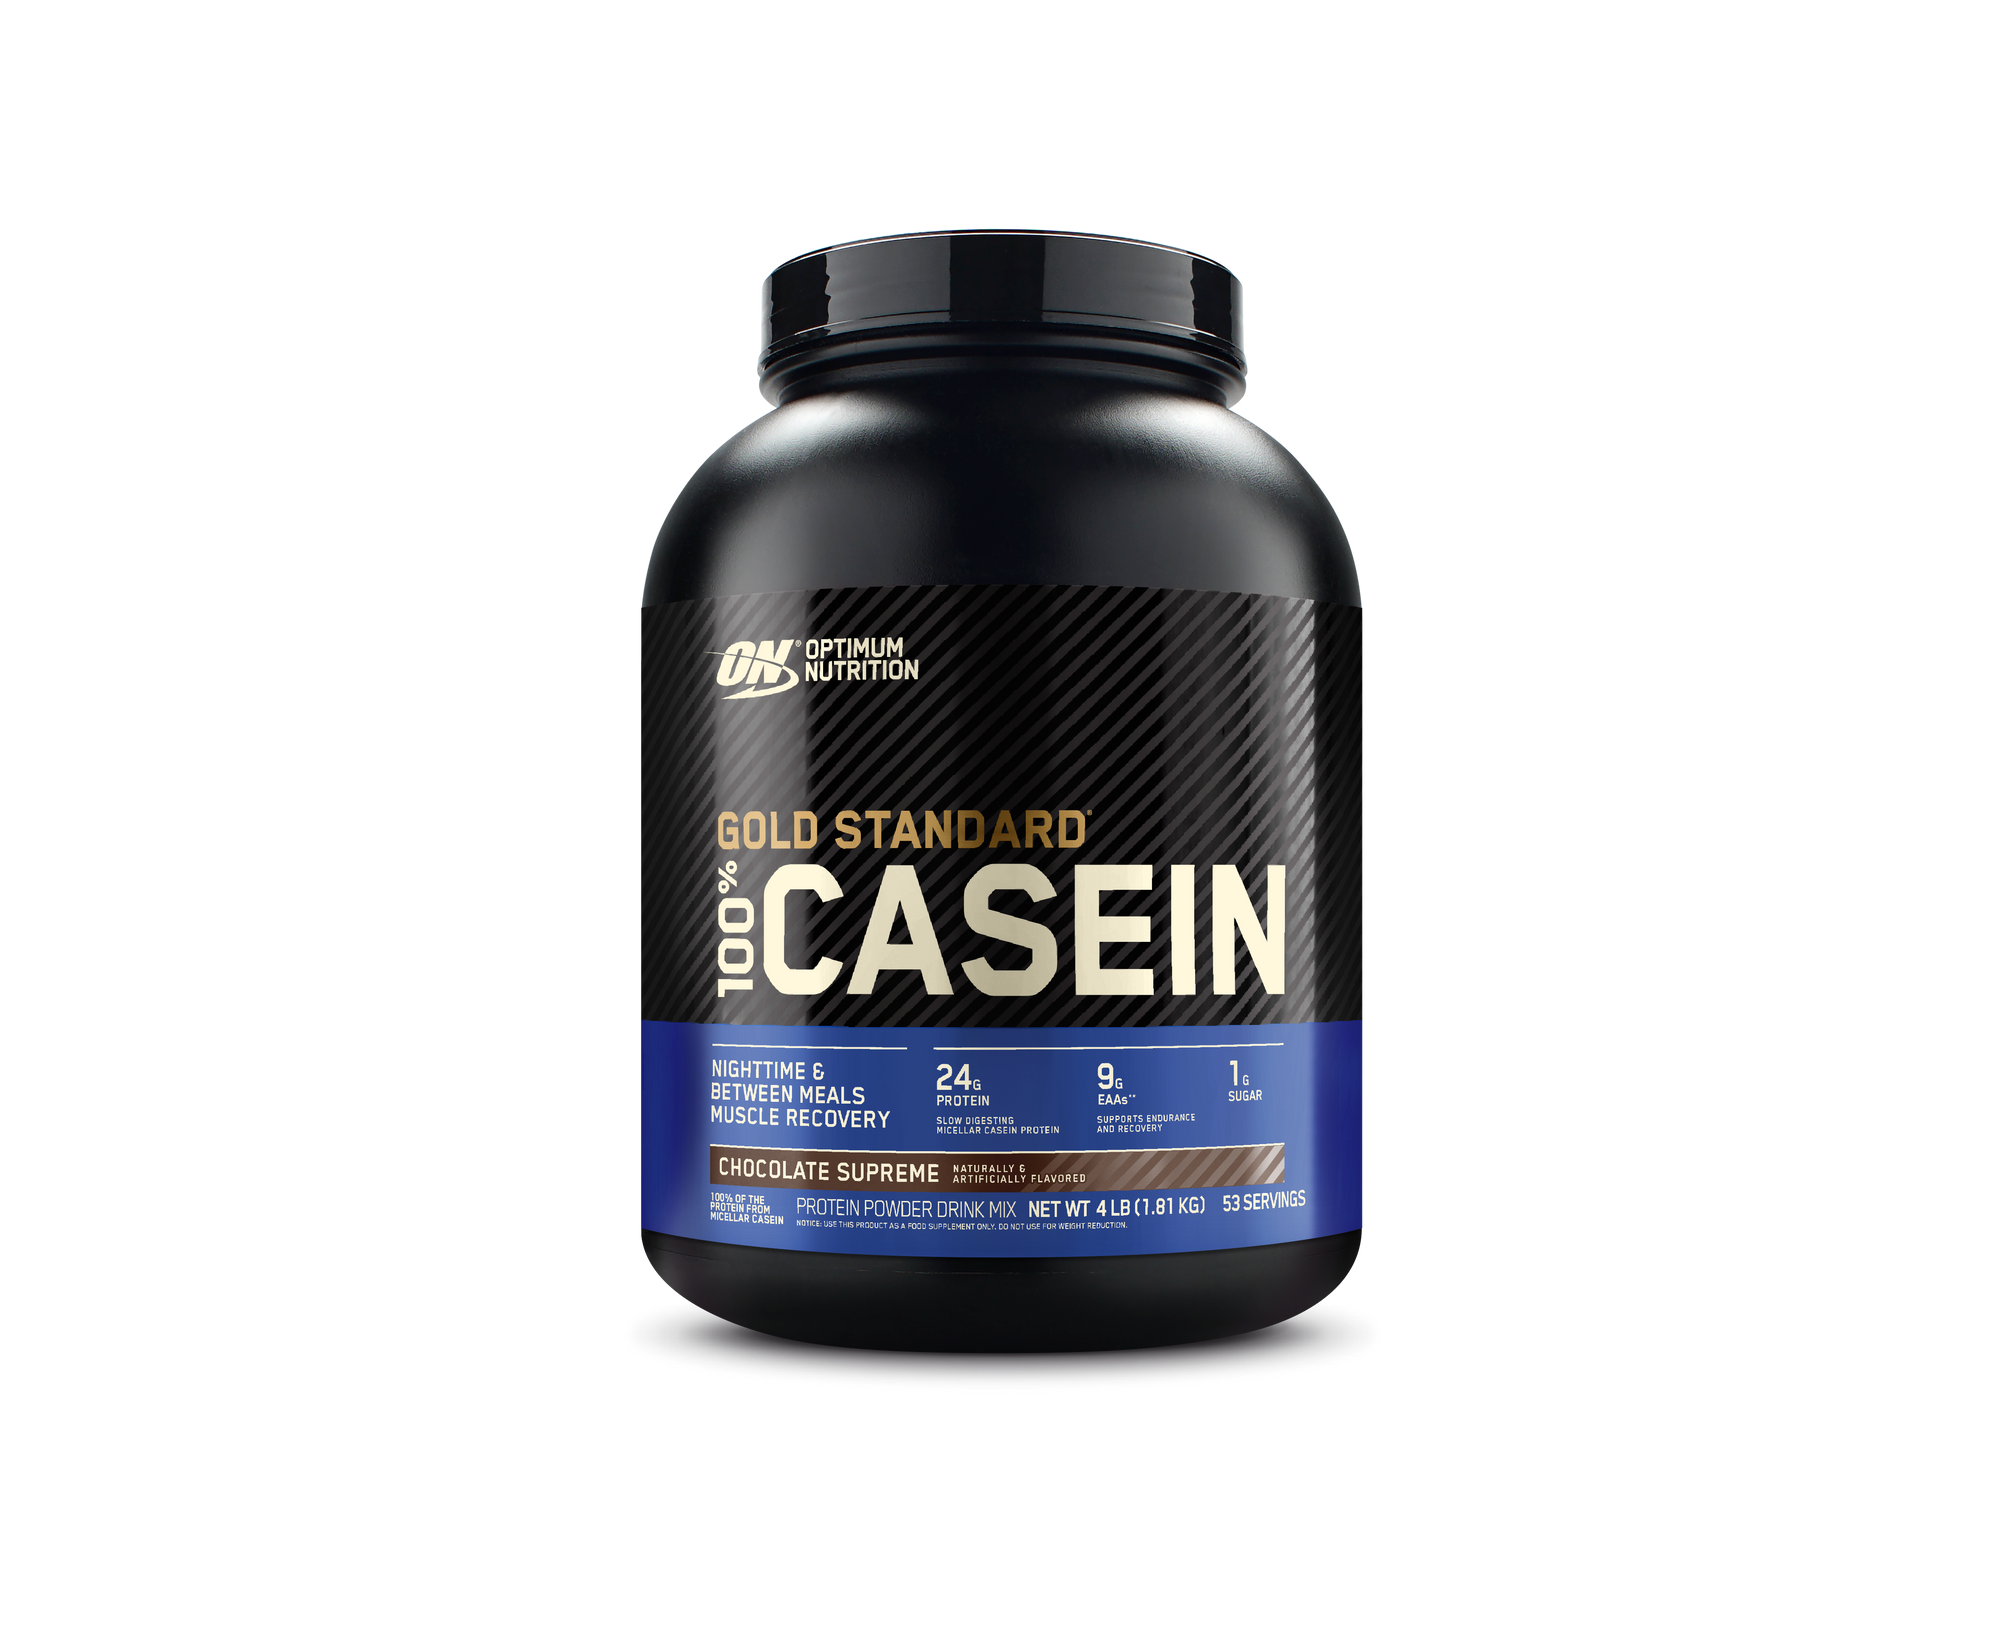 Fitness Hero Presents, 100% Casein Gold Standard protein by Optimum Nutrition. It contains ultra pure micellar Casein protein that will assist you in muscle growth